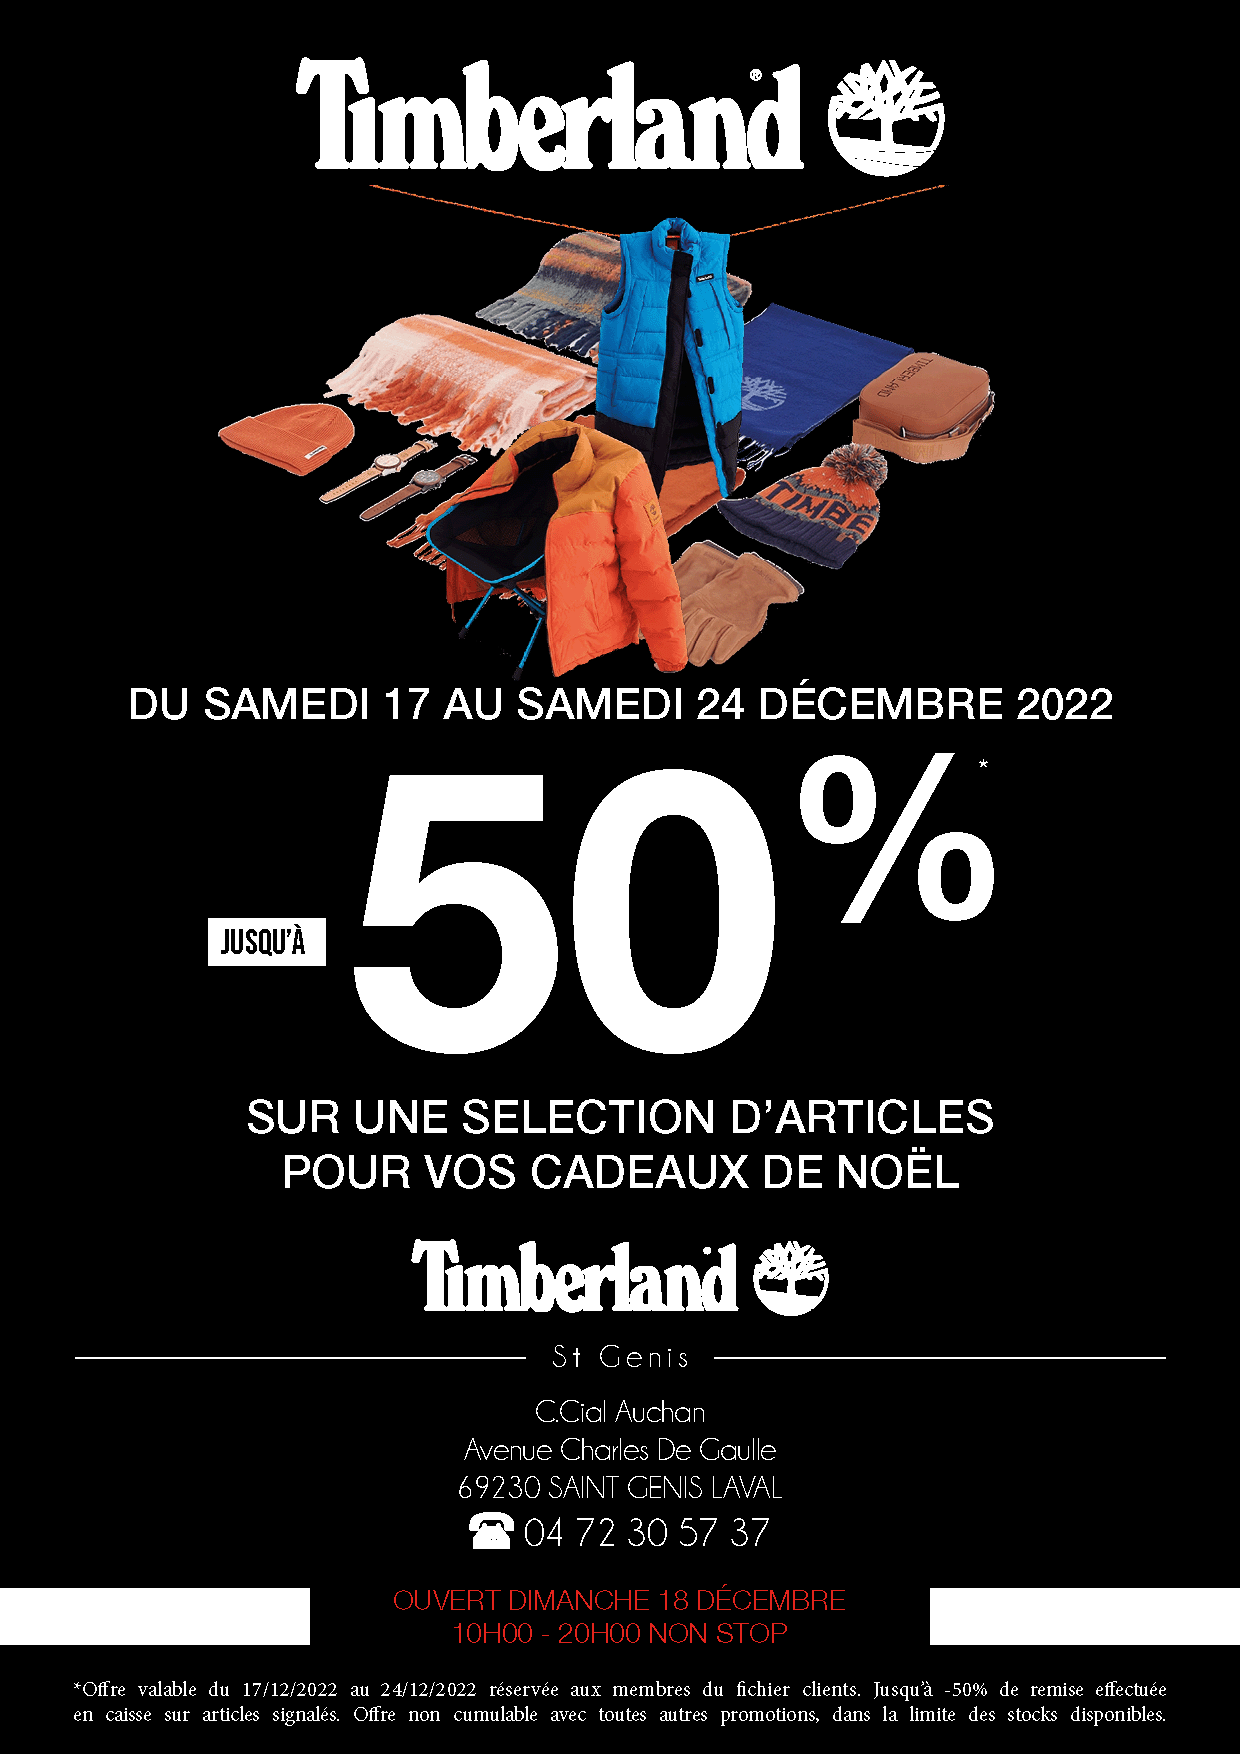 LLnkhfqlOiD_timberland-SMS-DECEMBRE-2022-ST-GENIS.gif